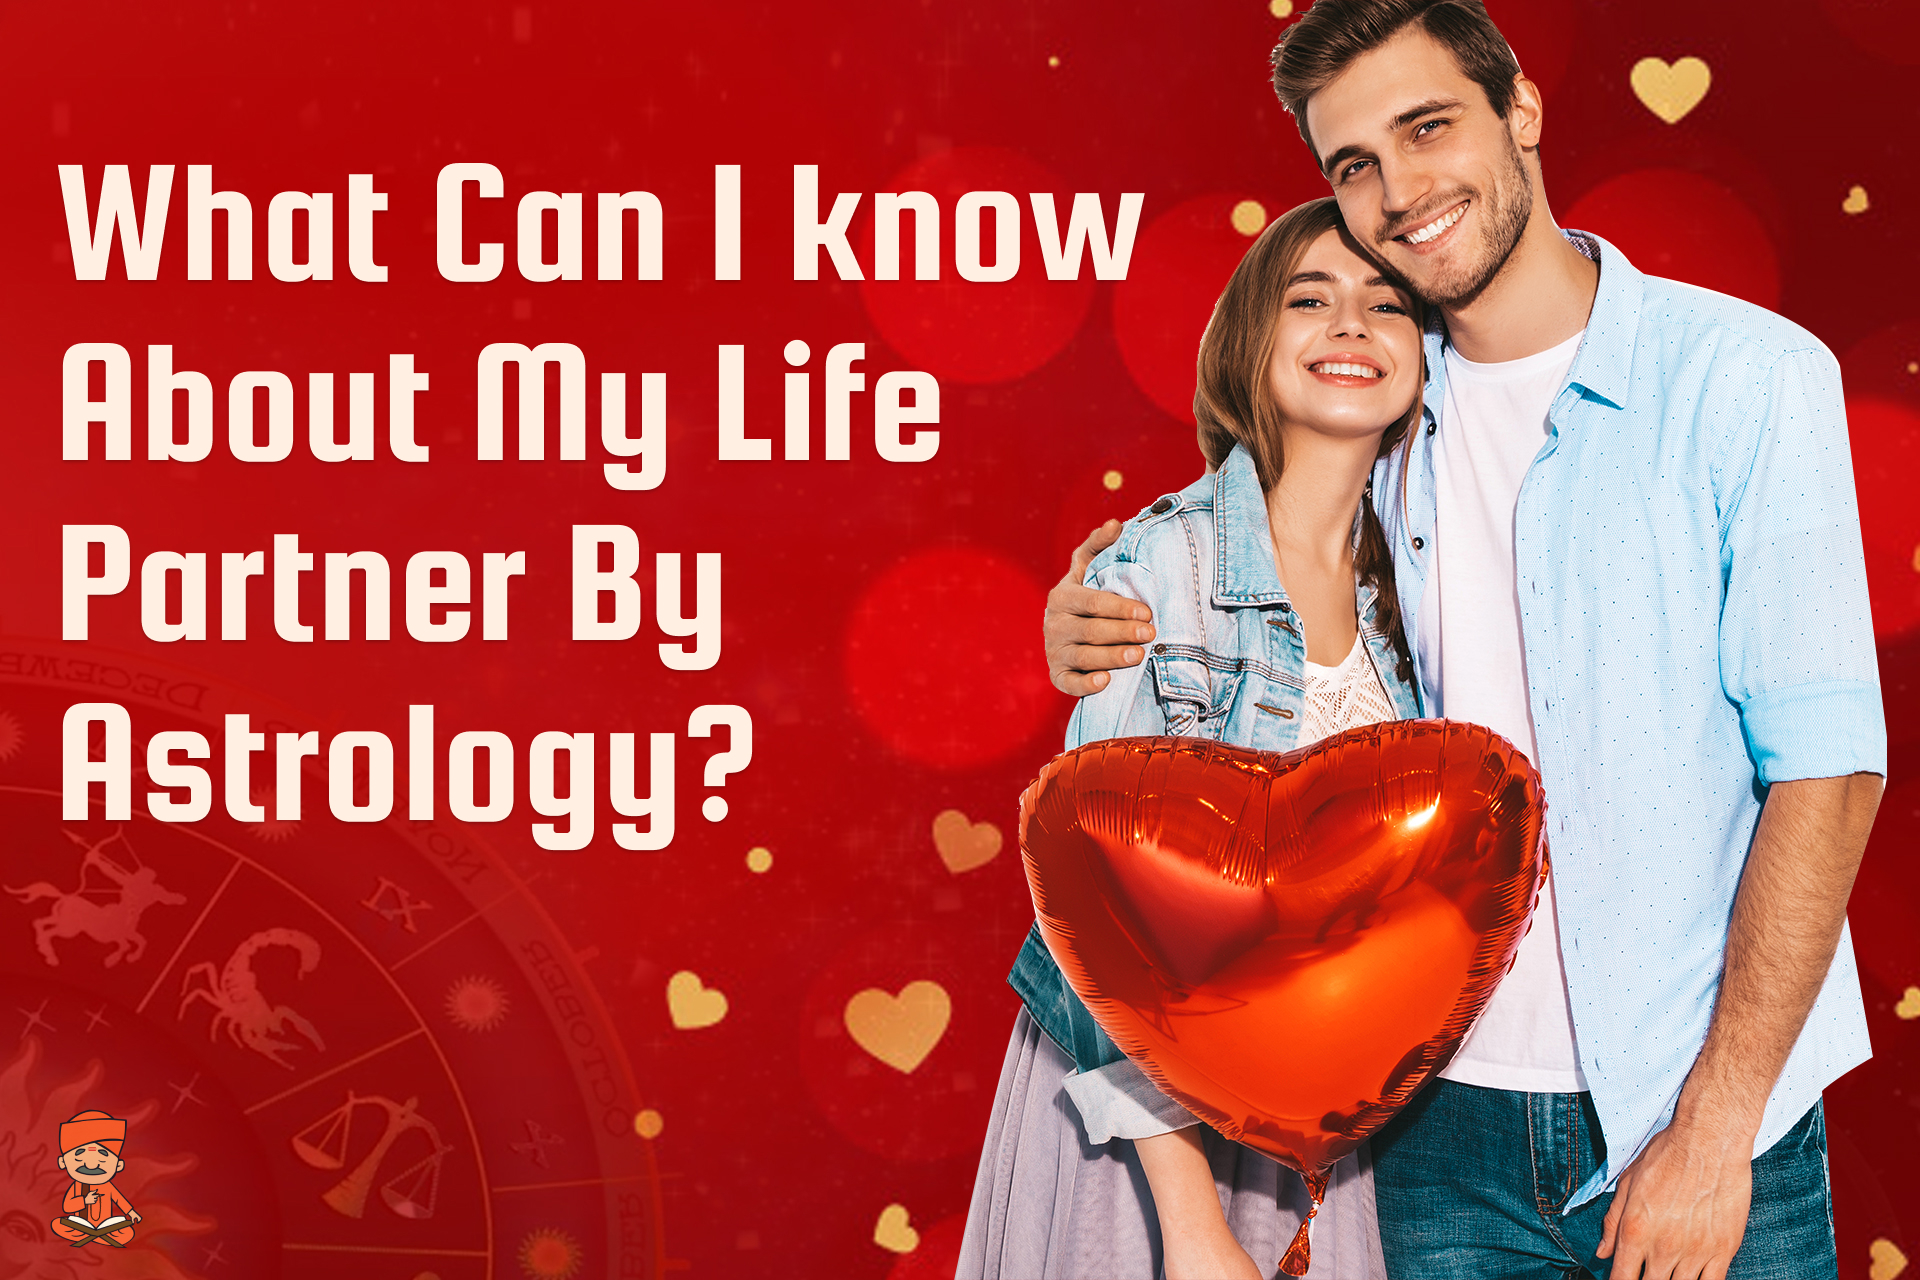 What Can I Know About My Life Partner By Astrology